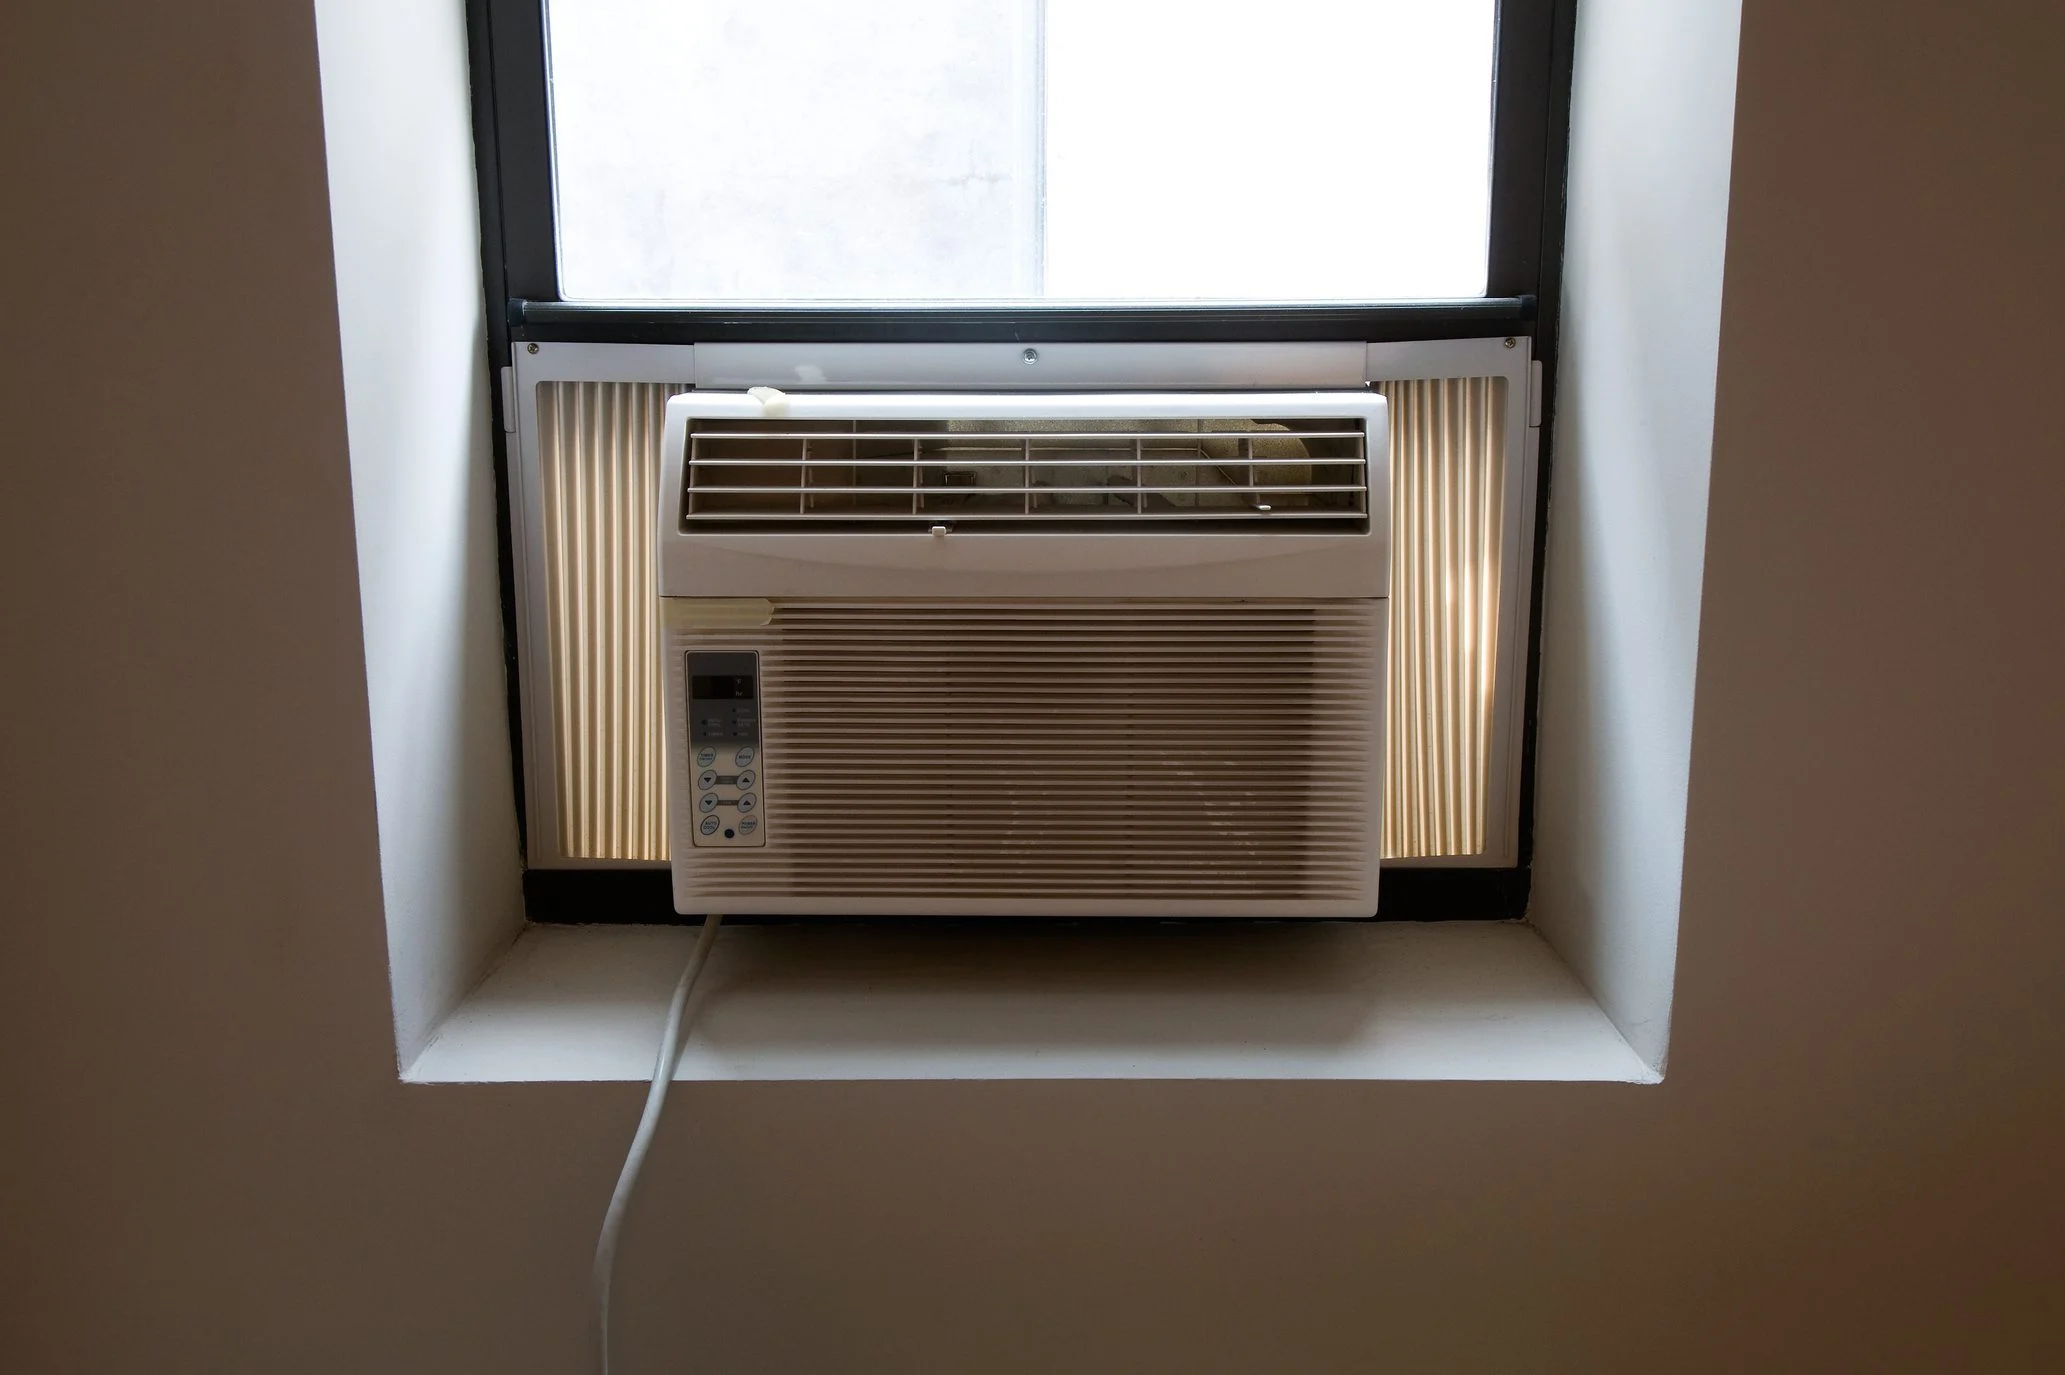 What Causes An Air Conditioner To Leak Water Inside